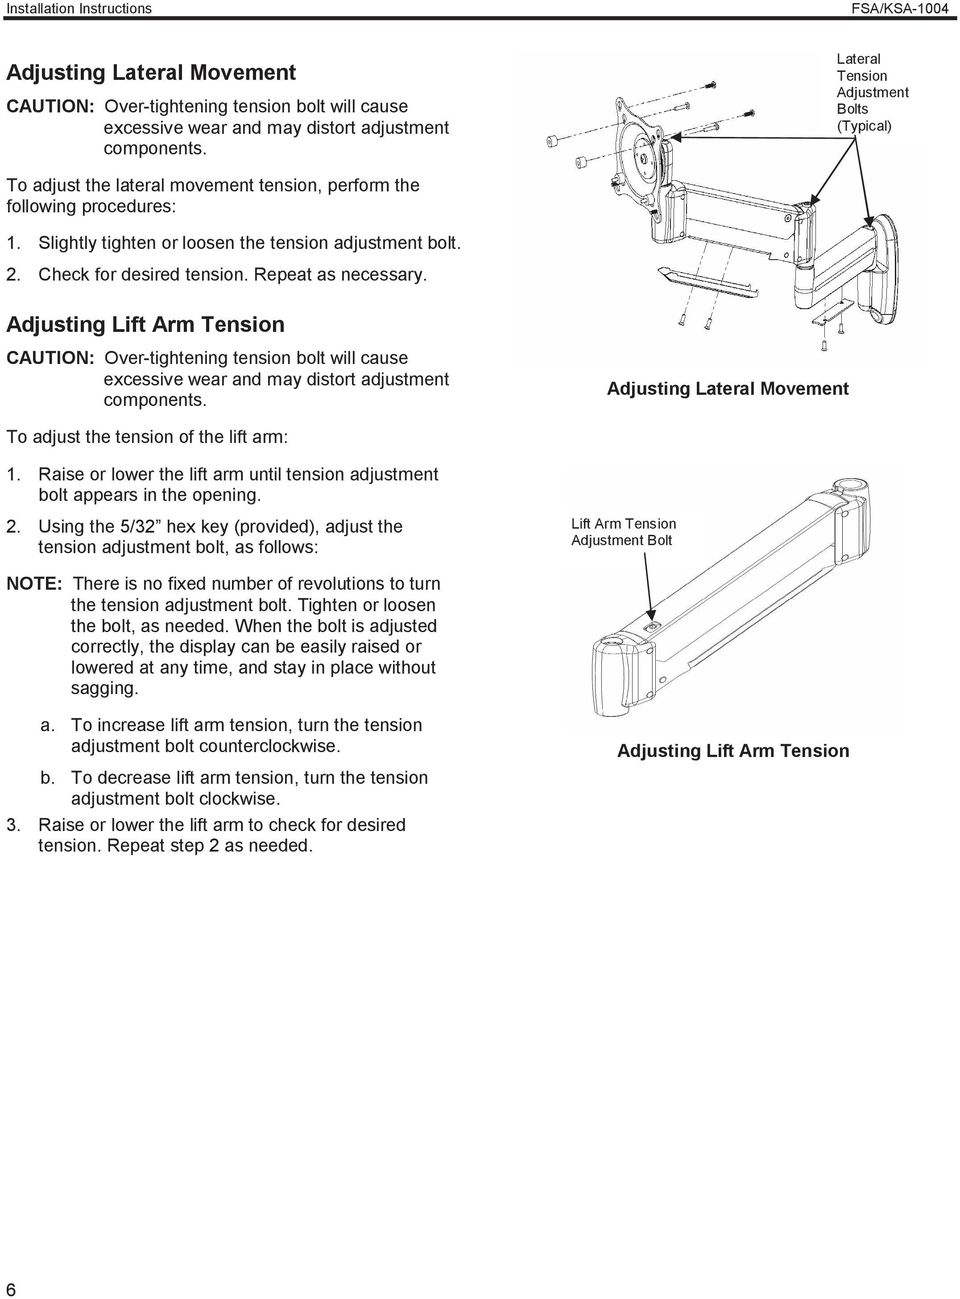 Check for desired tension. Repeat as necessary. Adjusting Lift Arm Tension CAUTION: Over-tightening tension bolt will cause excessive wear and may distort adjustment components.